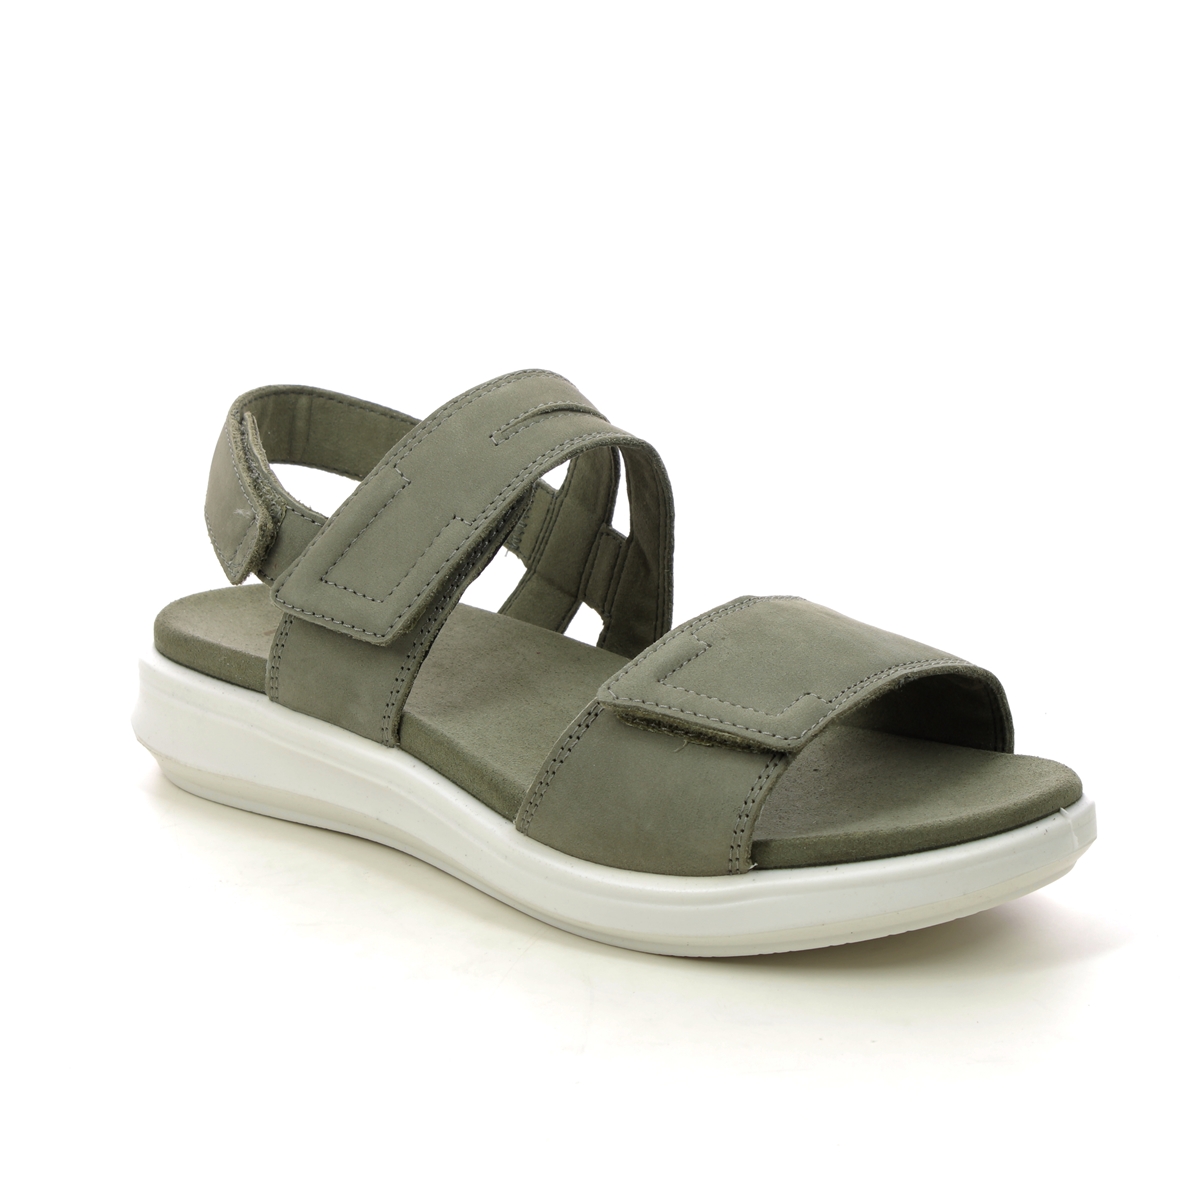 Legero Ella 3v Sage green Womens Comfortable Sandals 2000311-7520 in a Plain Leather in Size 37